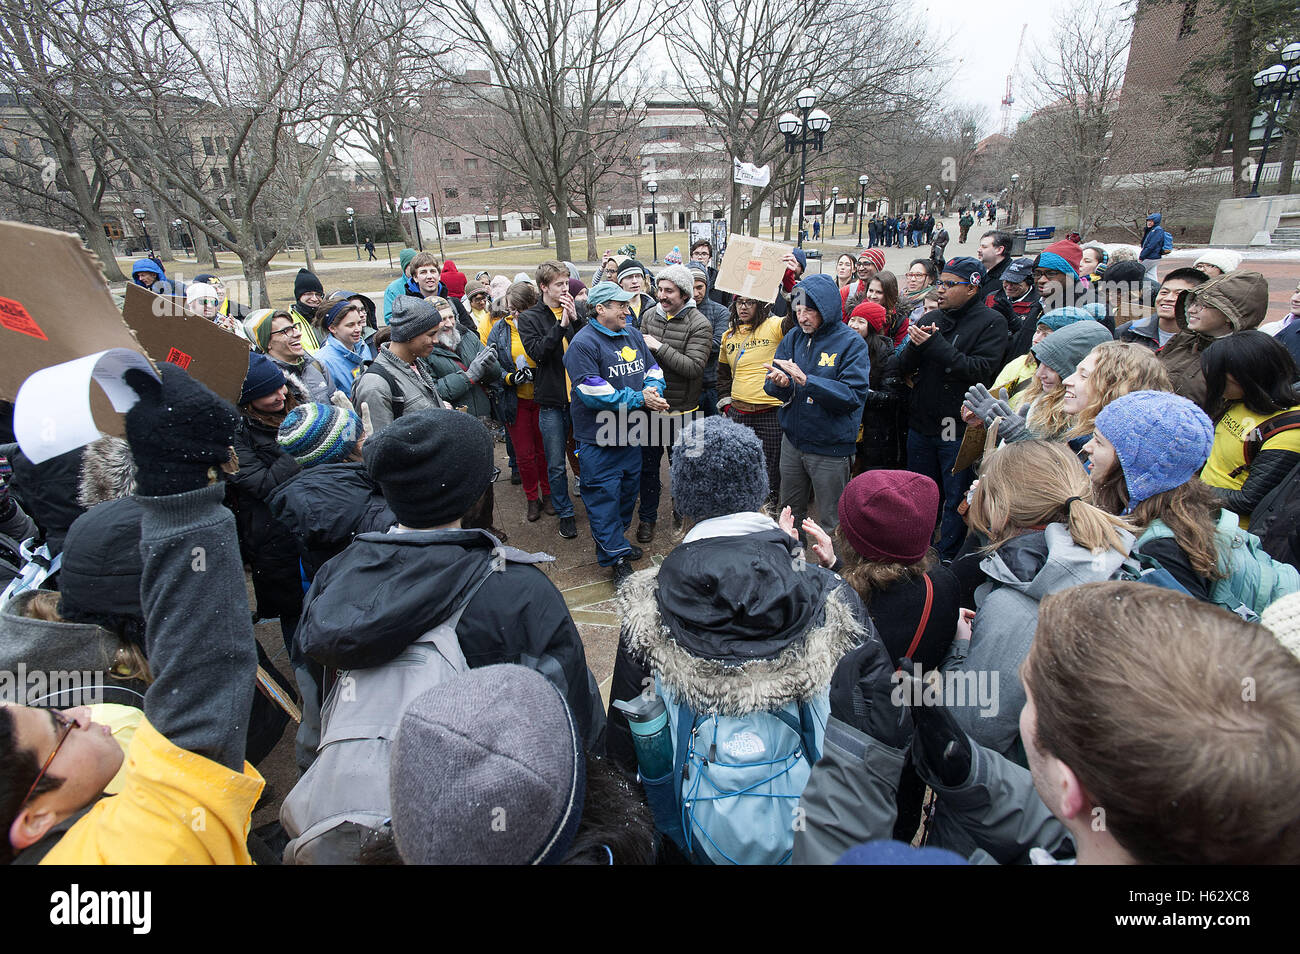 Ann Arbor, MI, USA. 27th Mar, 2015. Anti-war activist Tom Hayden of Los Angeles speaks on the University of Michigan Diag before a Teach-In   50, marking the 50th anniversary of the start of campus protests against the Vietnam War. © Mark Bialek/ZUMA Wire/Alamy Live News Stock Photo